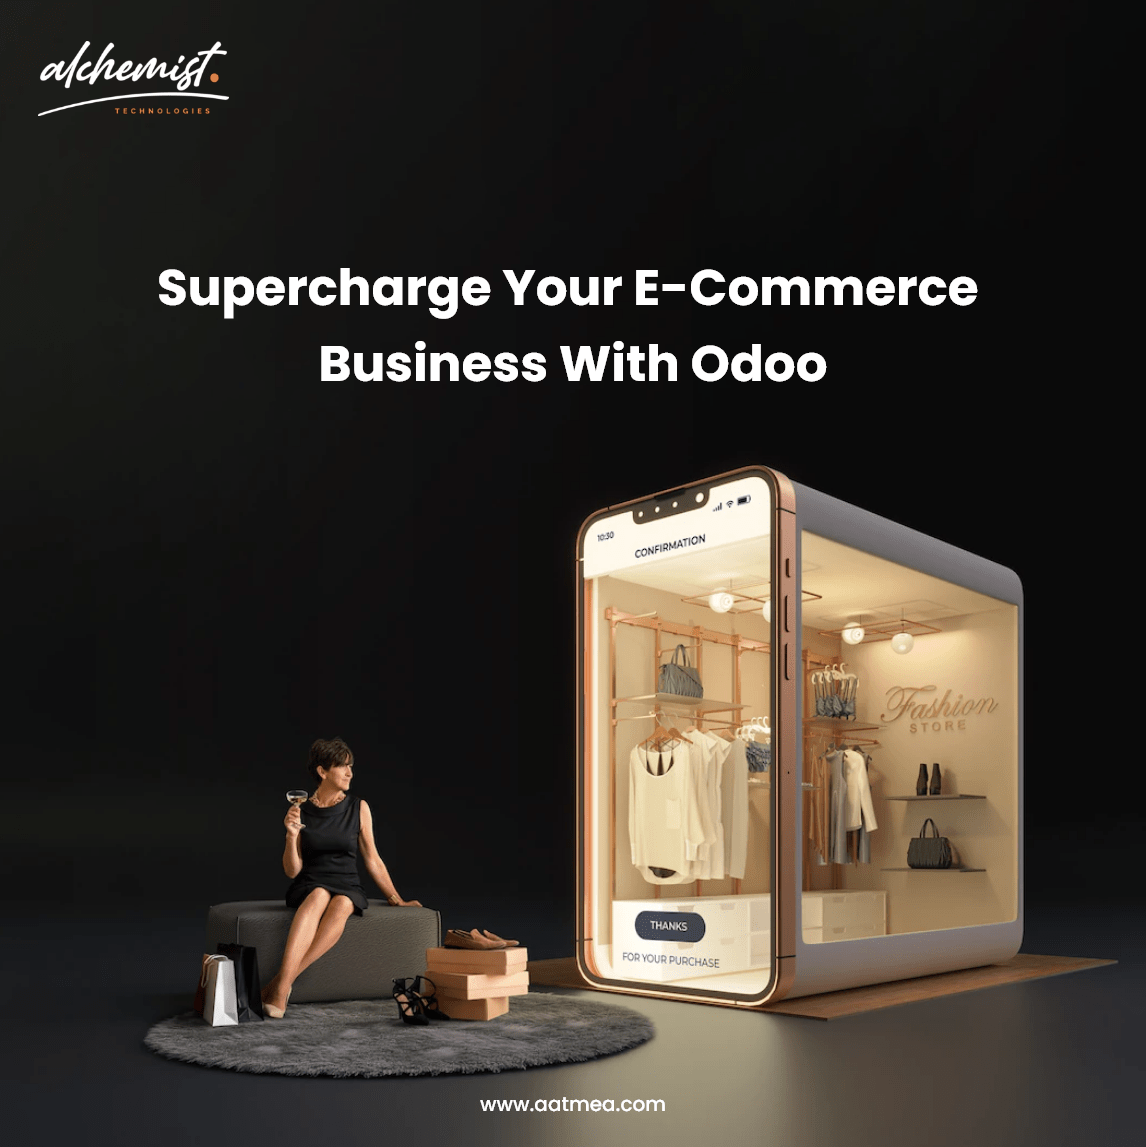 Supercharge your E-Commerce business with Odoo